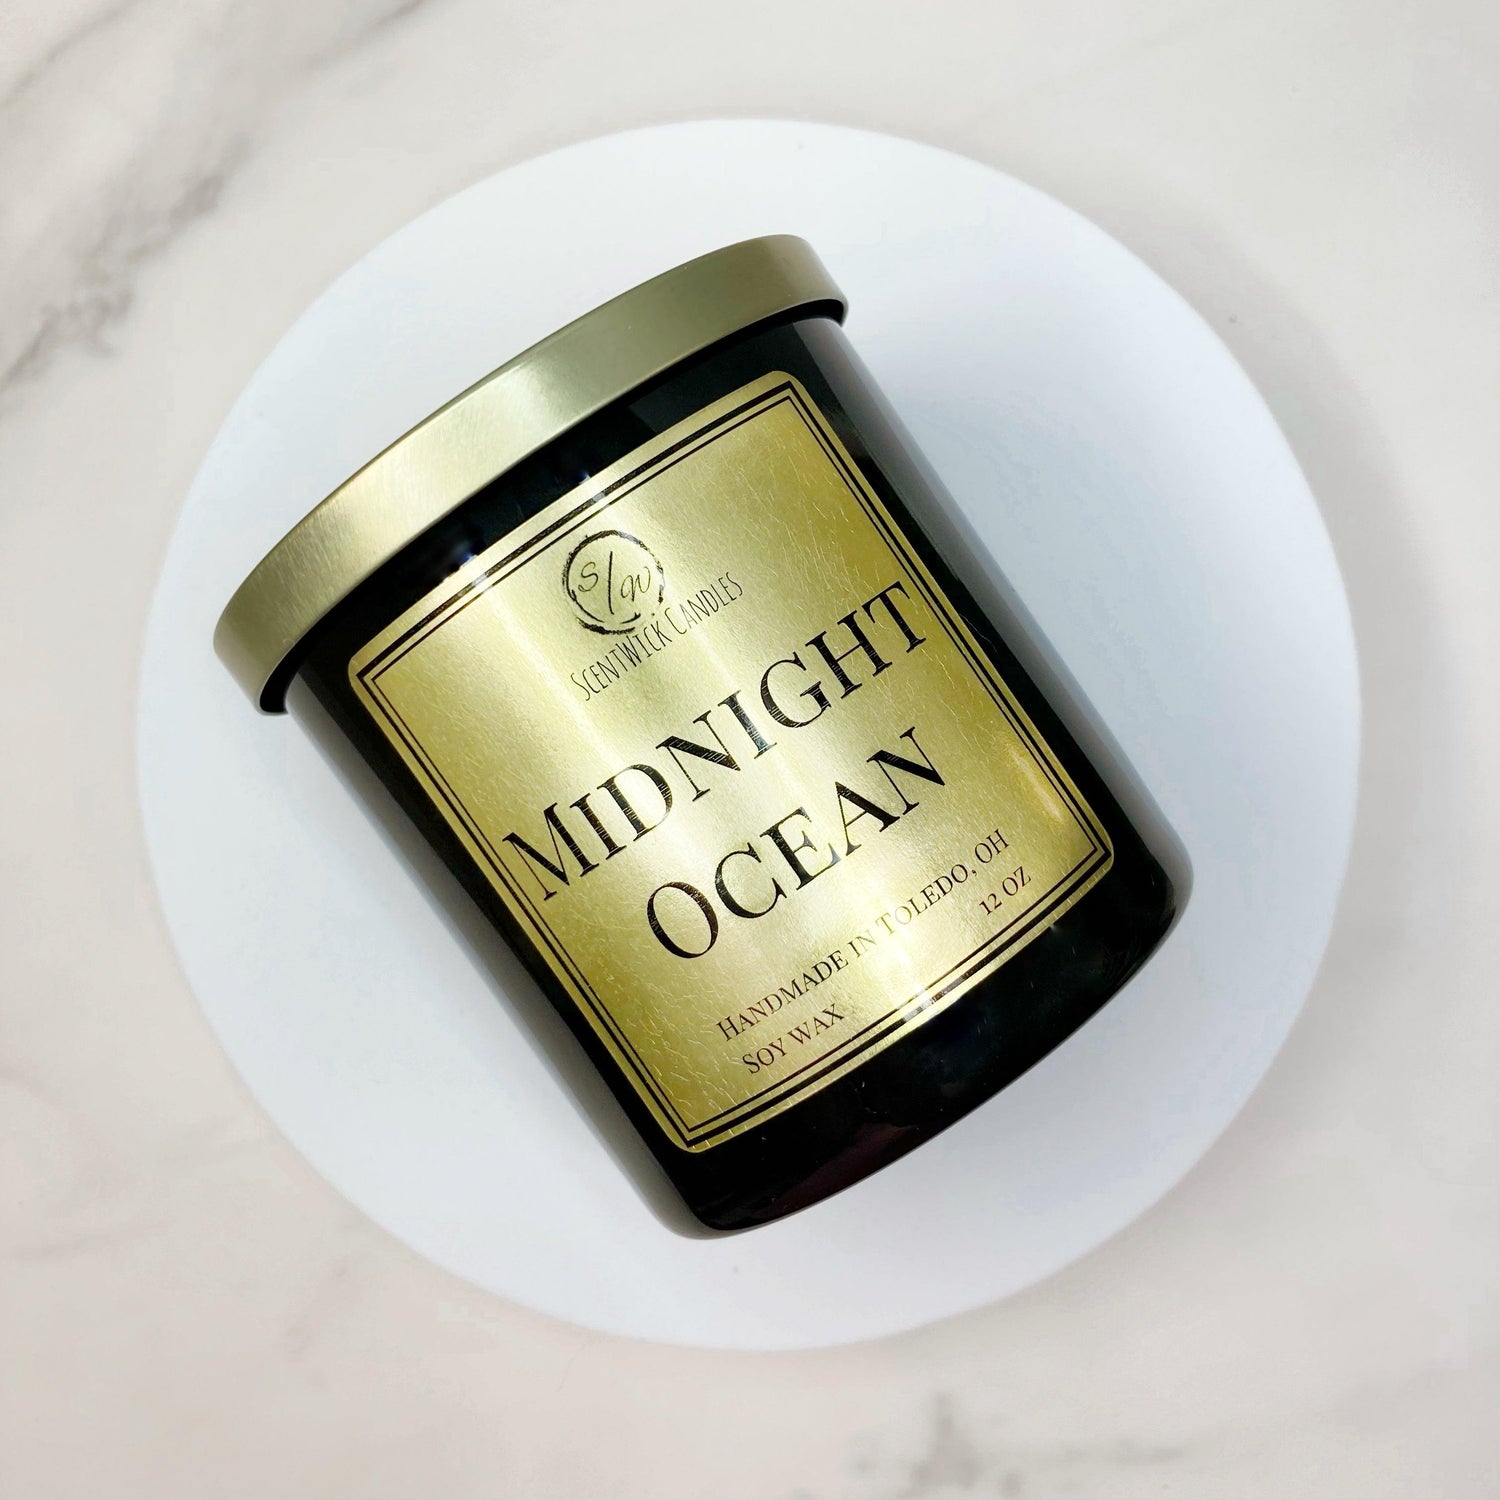 The Copper & Gold Collection - Midnight Ocean Candle - ScentWick Candles